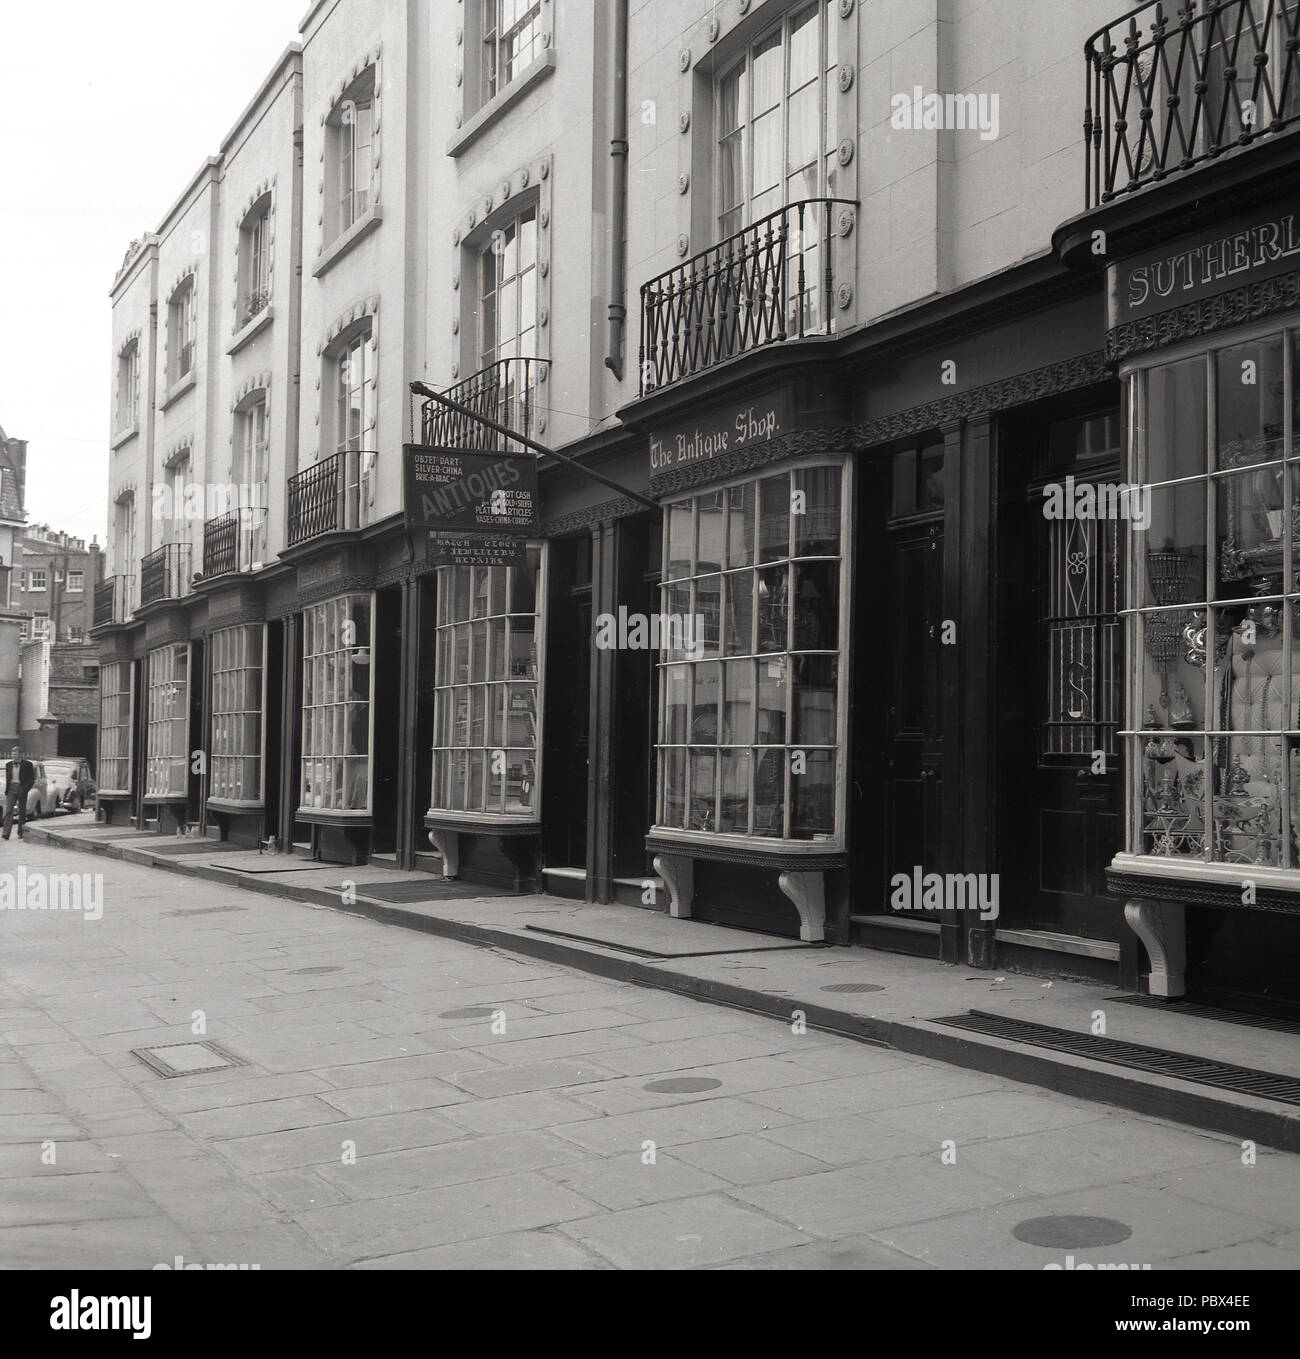 1950s, a view of Woburn Walk, London, WC1, England, UK, London's first pedestrian street, hence the name, 'walk'. An attractive unassuming street or passageway of victorian buildings with bow-fronted shop fronts, the famous author WB Yeats lived there from 1855 until 1919. Stock Photo